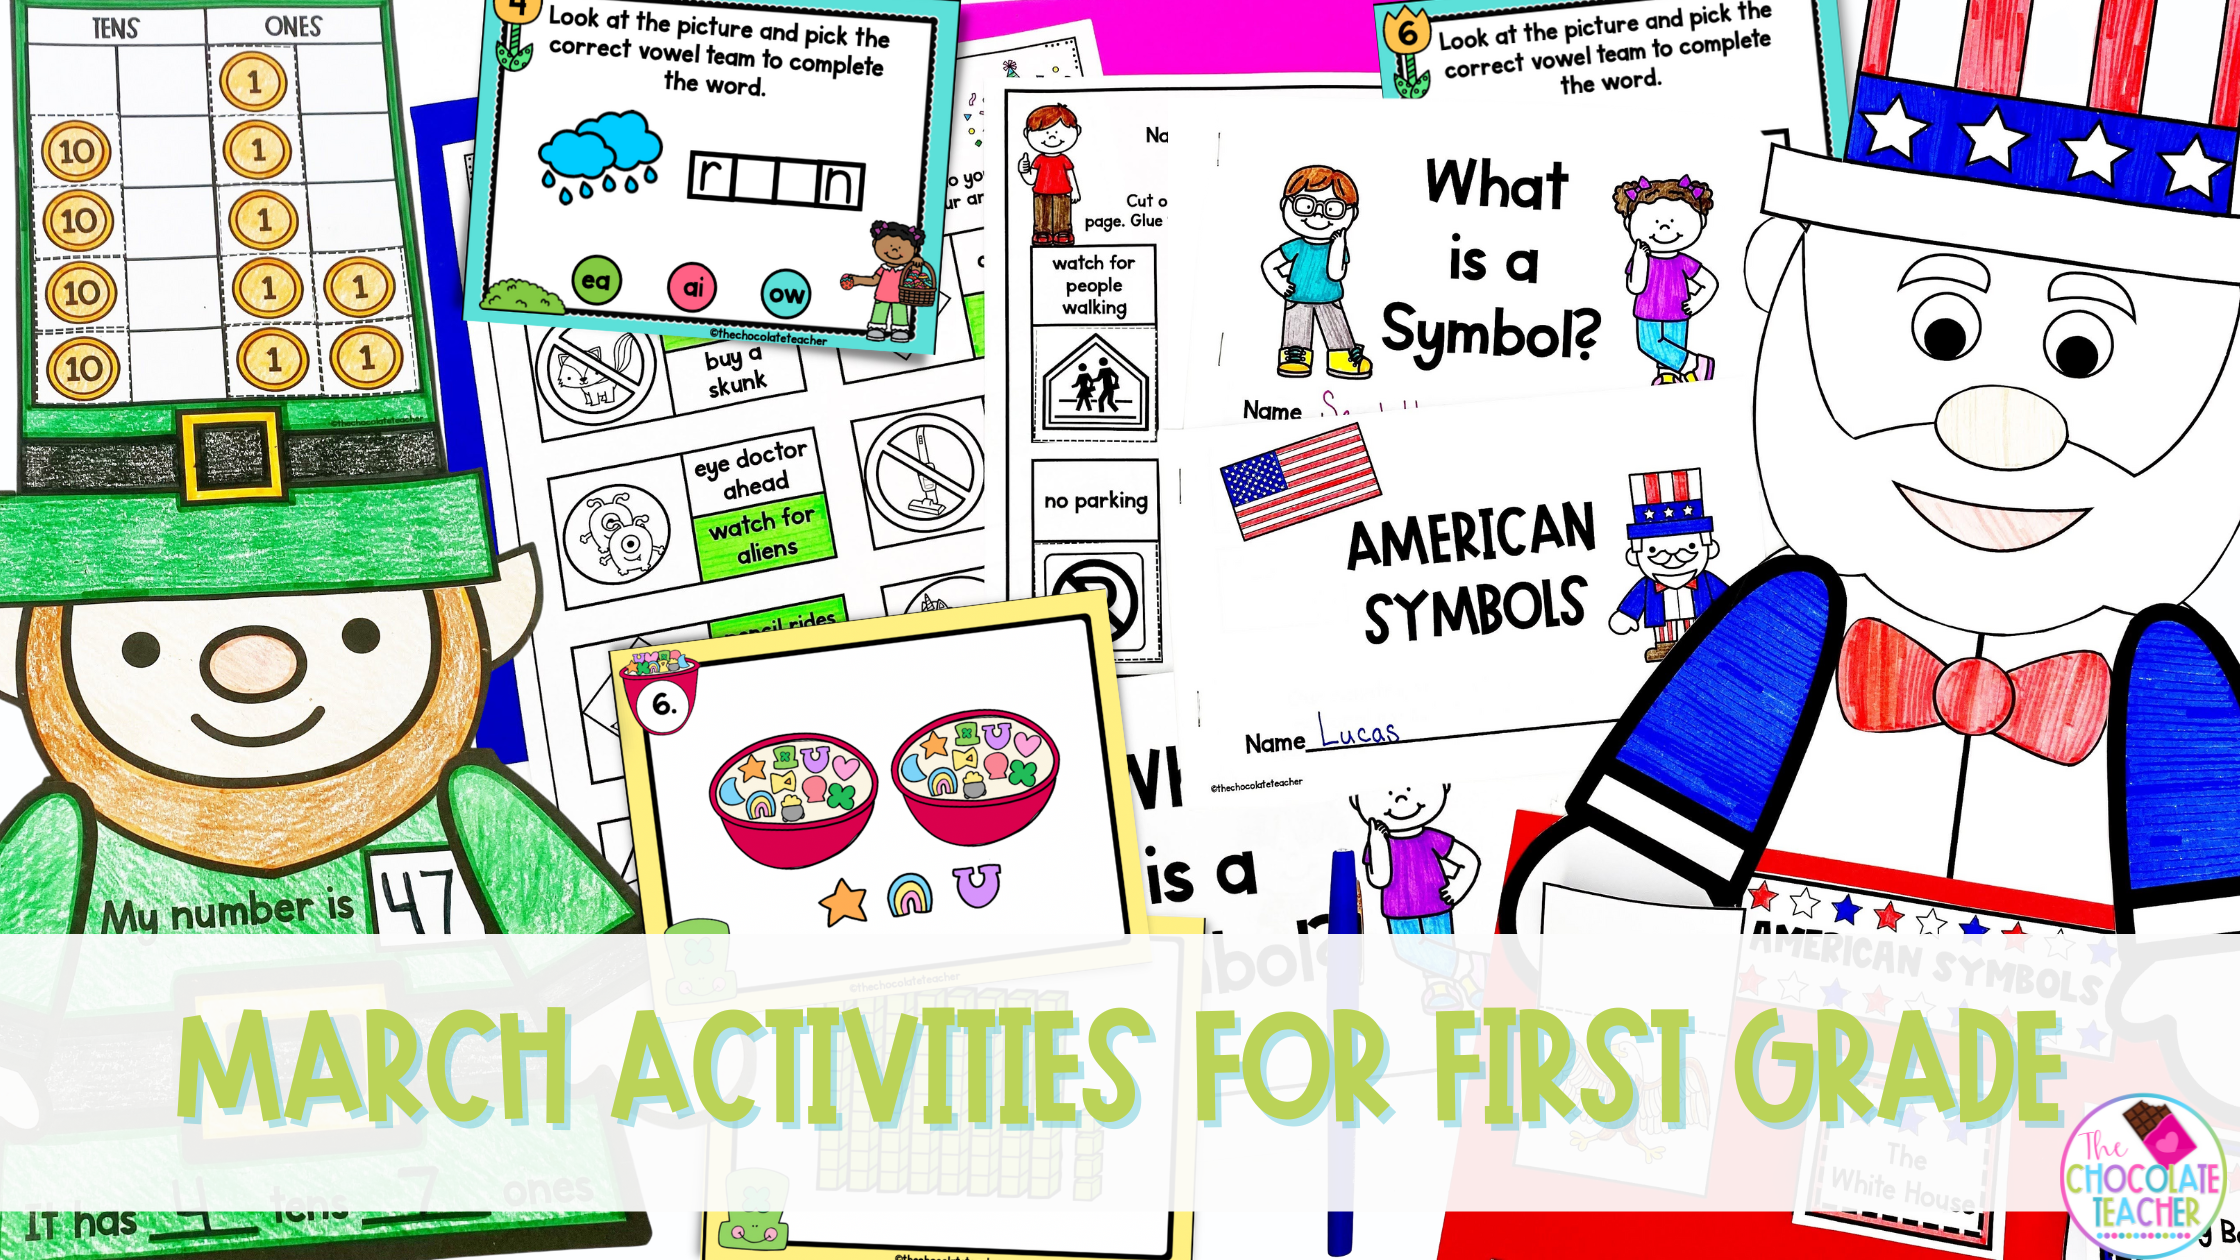 Grab these exciting and creative March activities to use with your first grade students to help them practice math and ELA concepts in fun ways this spring.